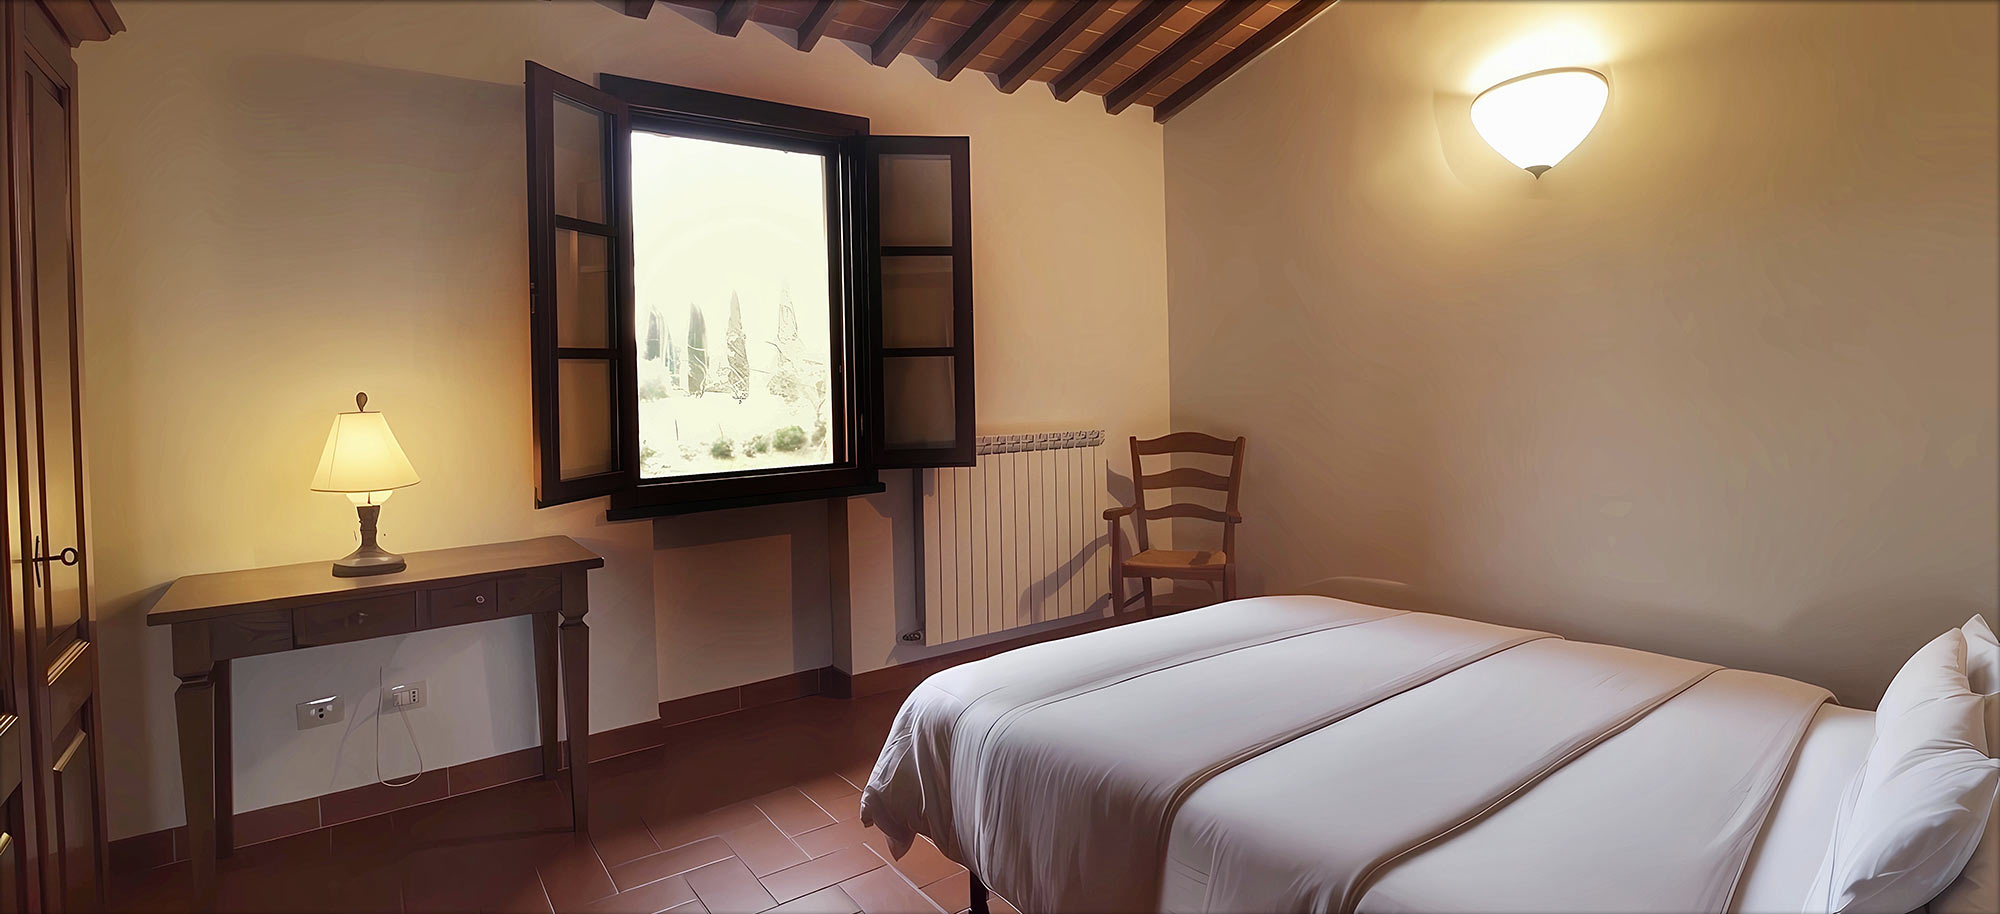 Corte Tommasi - Holiday apartments in Tuscany - 201 - Tuscany apartment with swimming pool